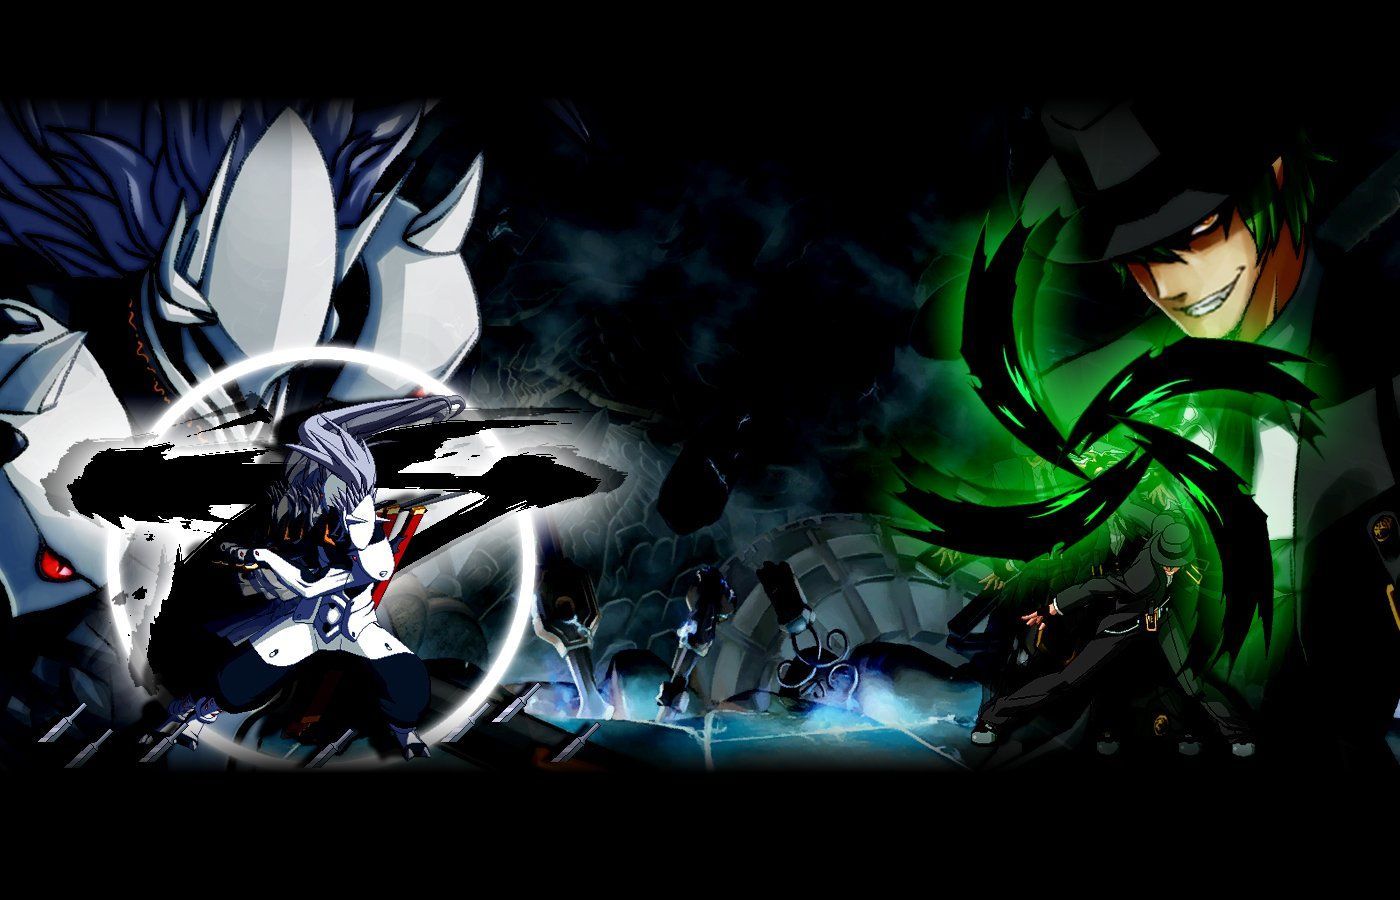 BlazBlue: Continuum Shift Wallpaper Background Image. View, download, comment, and rate. Wallpaper, Free background, Background image